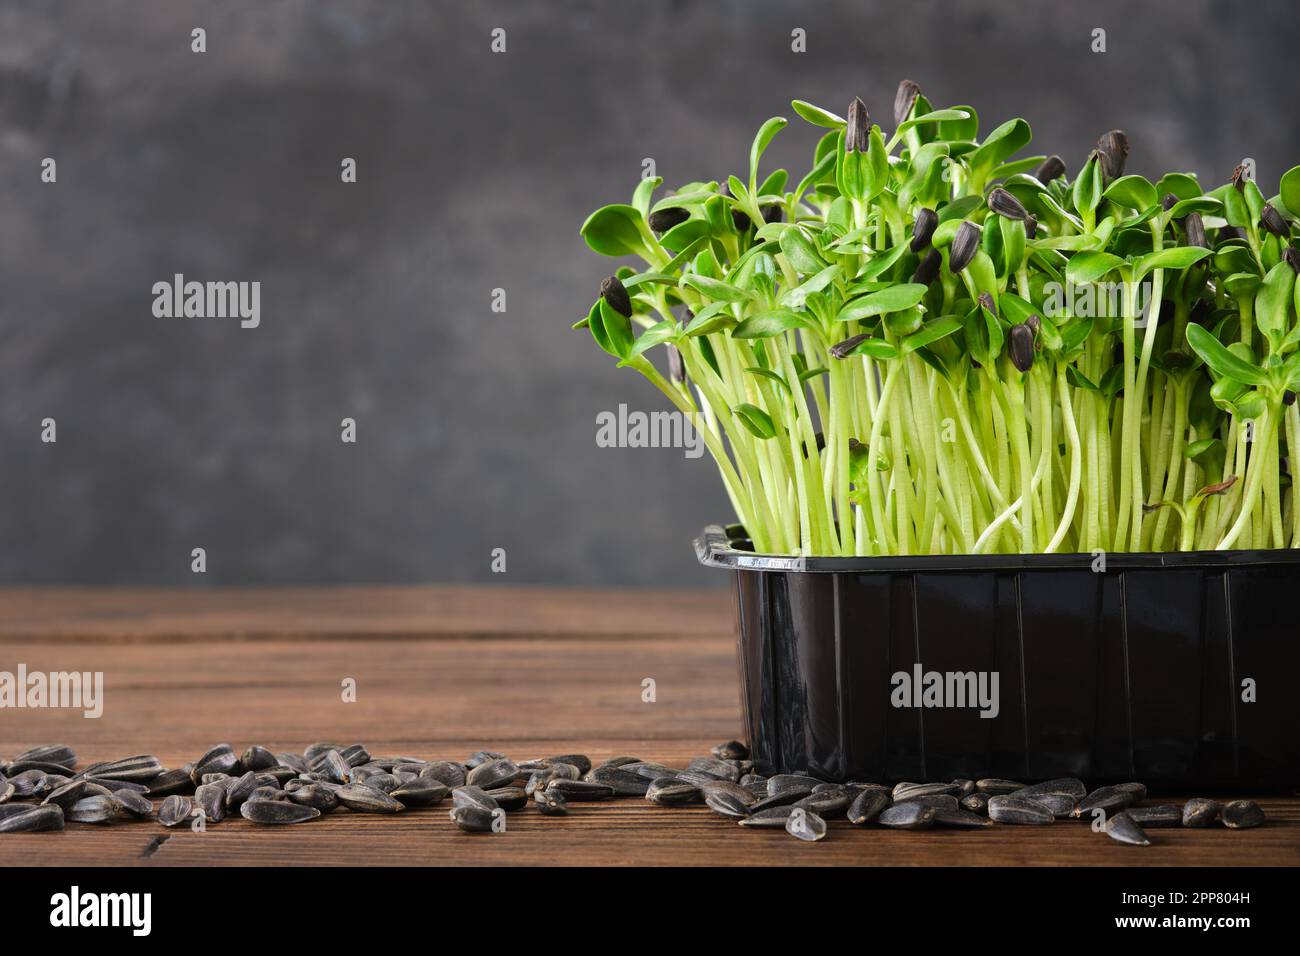 Sunflower seeds sprouts for a healthy diet nutrition. Microgreens. Green growing seedlings. Stock Photo